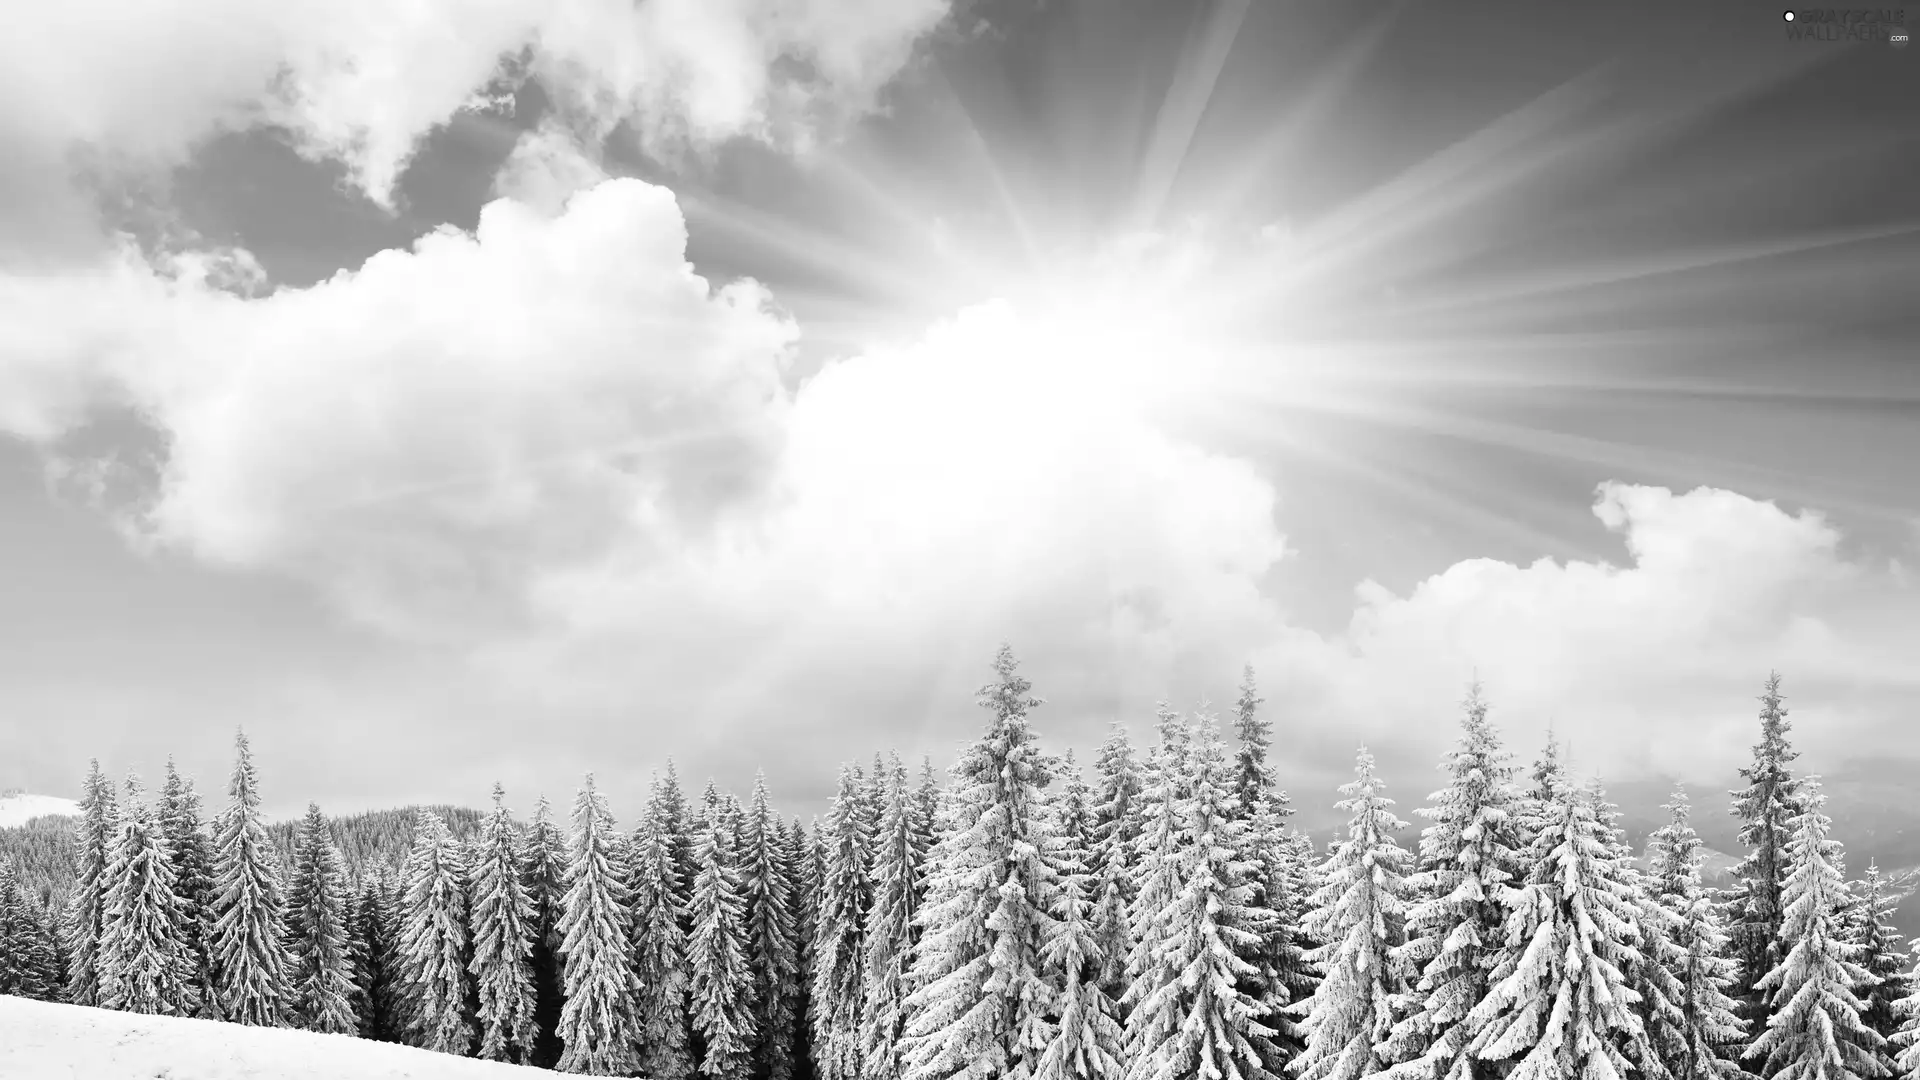 forest, winter, rays, sun, clouds